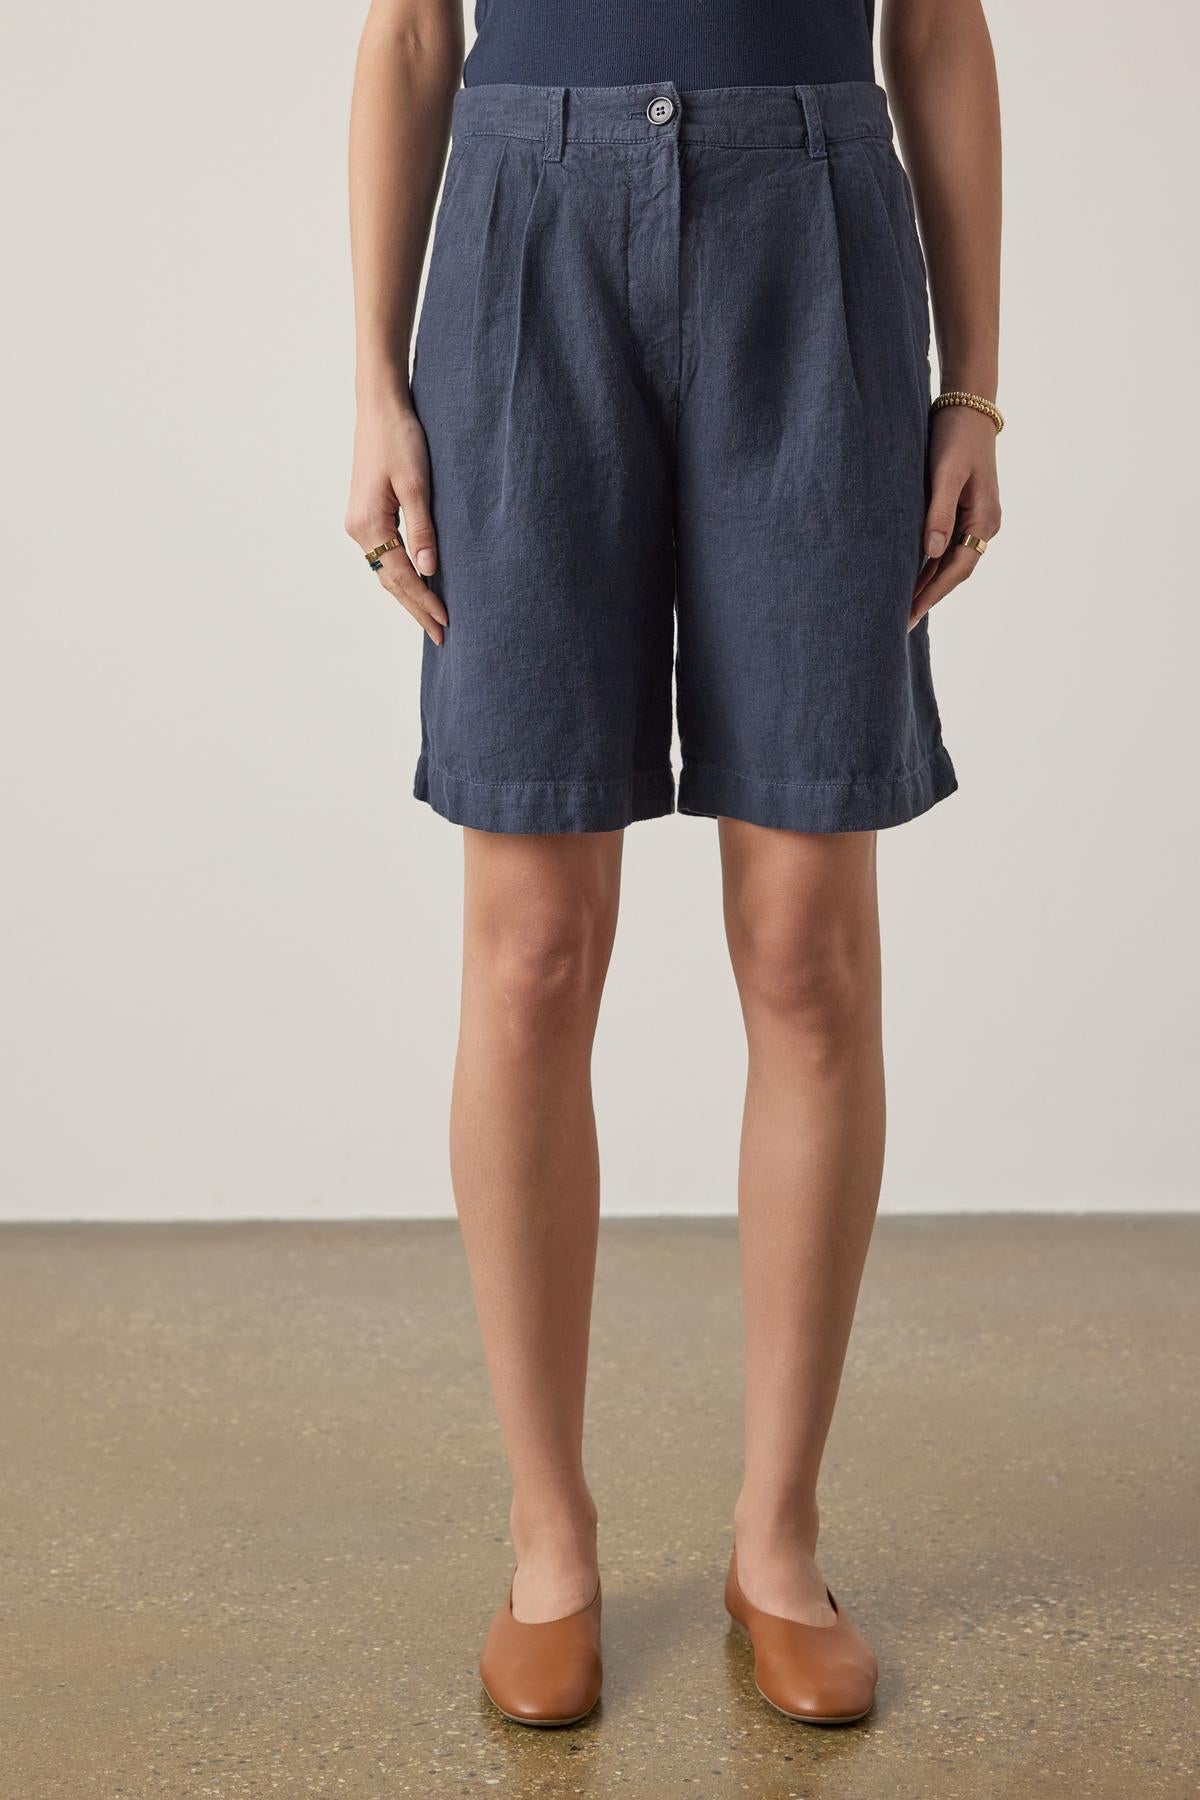 A woman stands wearing Velvet by Jenny Graham's LARCHMONT HEAVY LINEN SHORT and tan loafers, focusing on the lower half of the body against a neutral background.-36863276056769